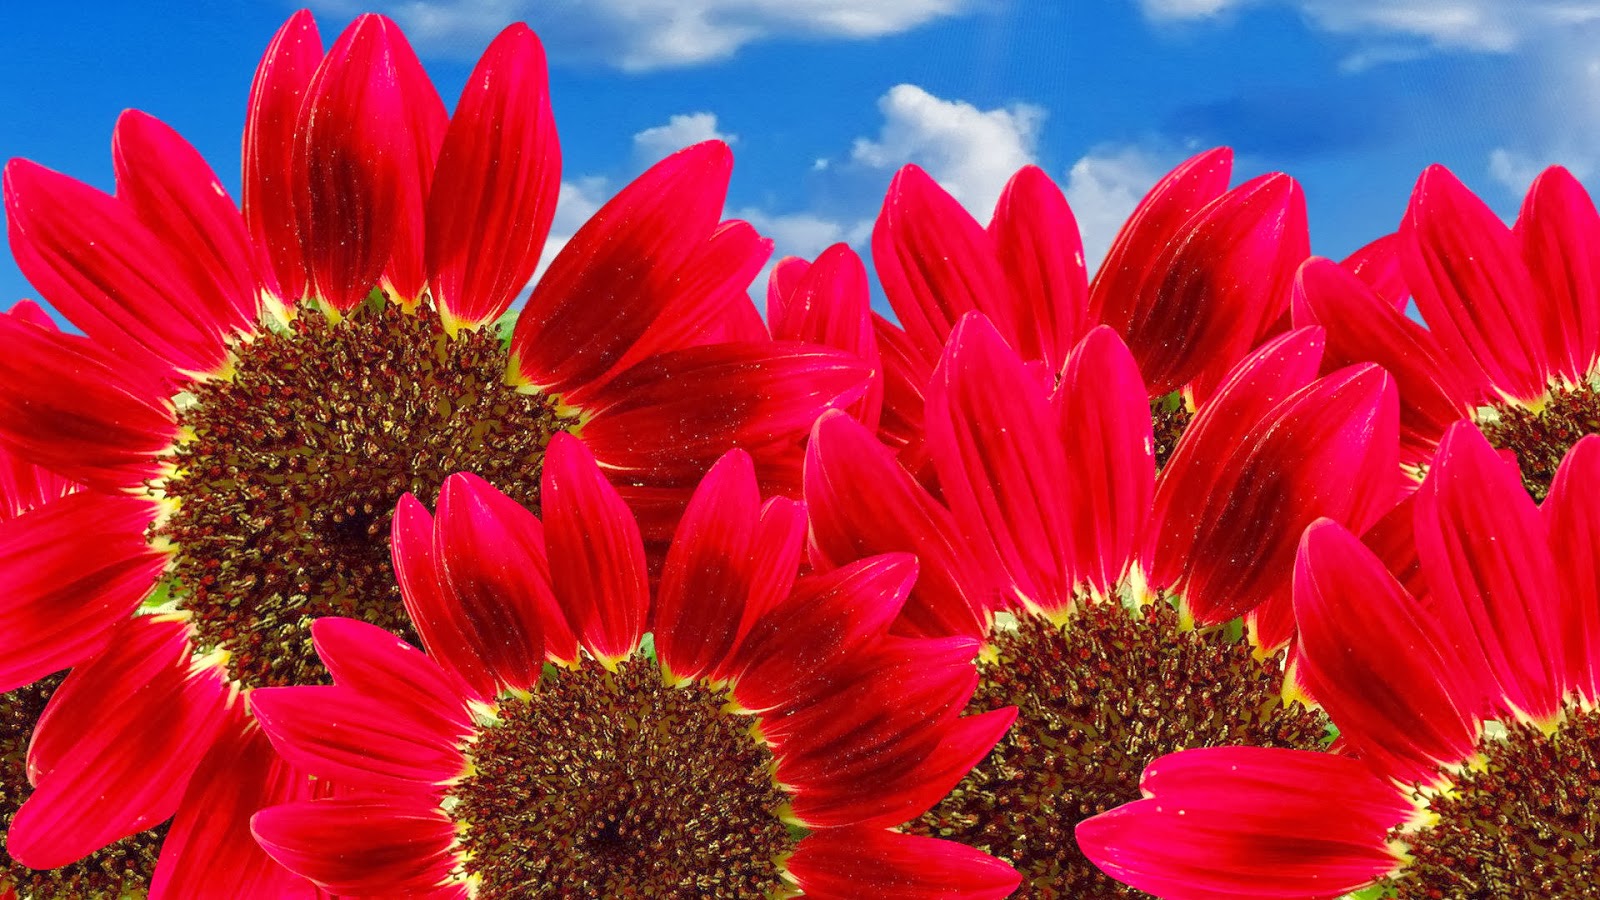 http://www.funmag.org/pictures-mag/flowers/beautiful-flowers-wallpapres/